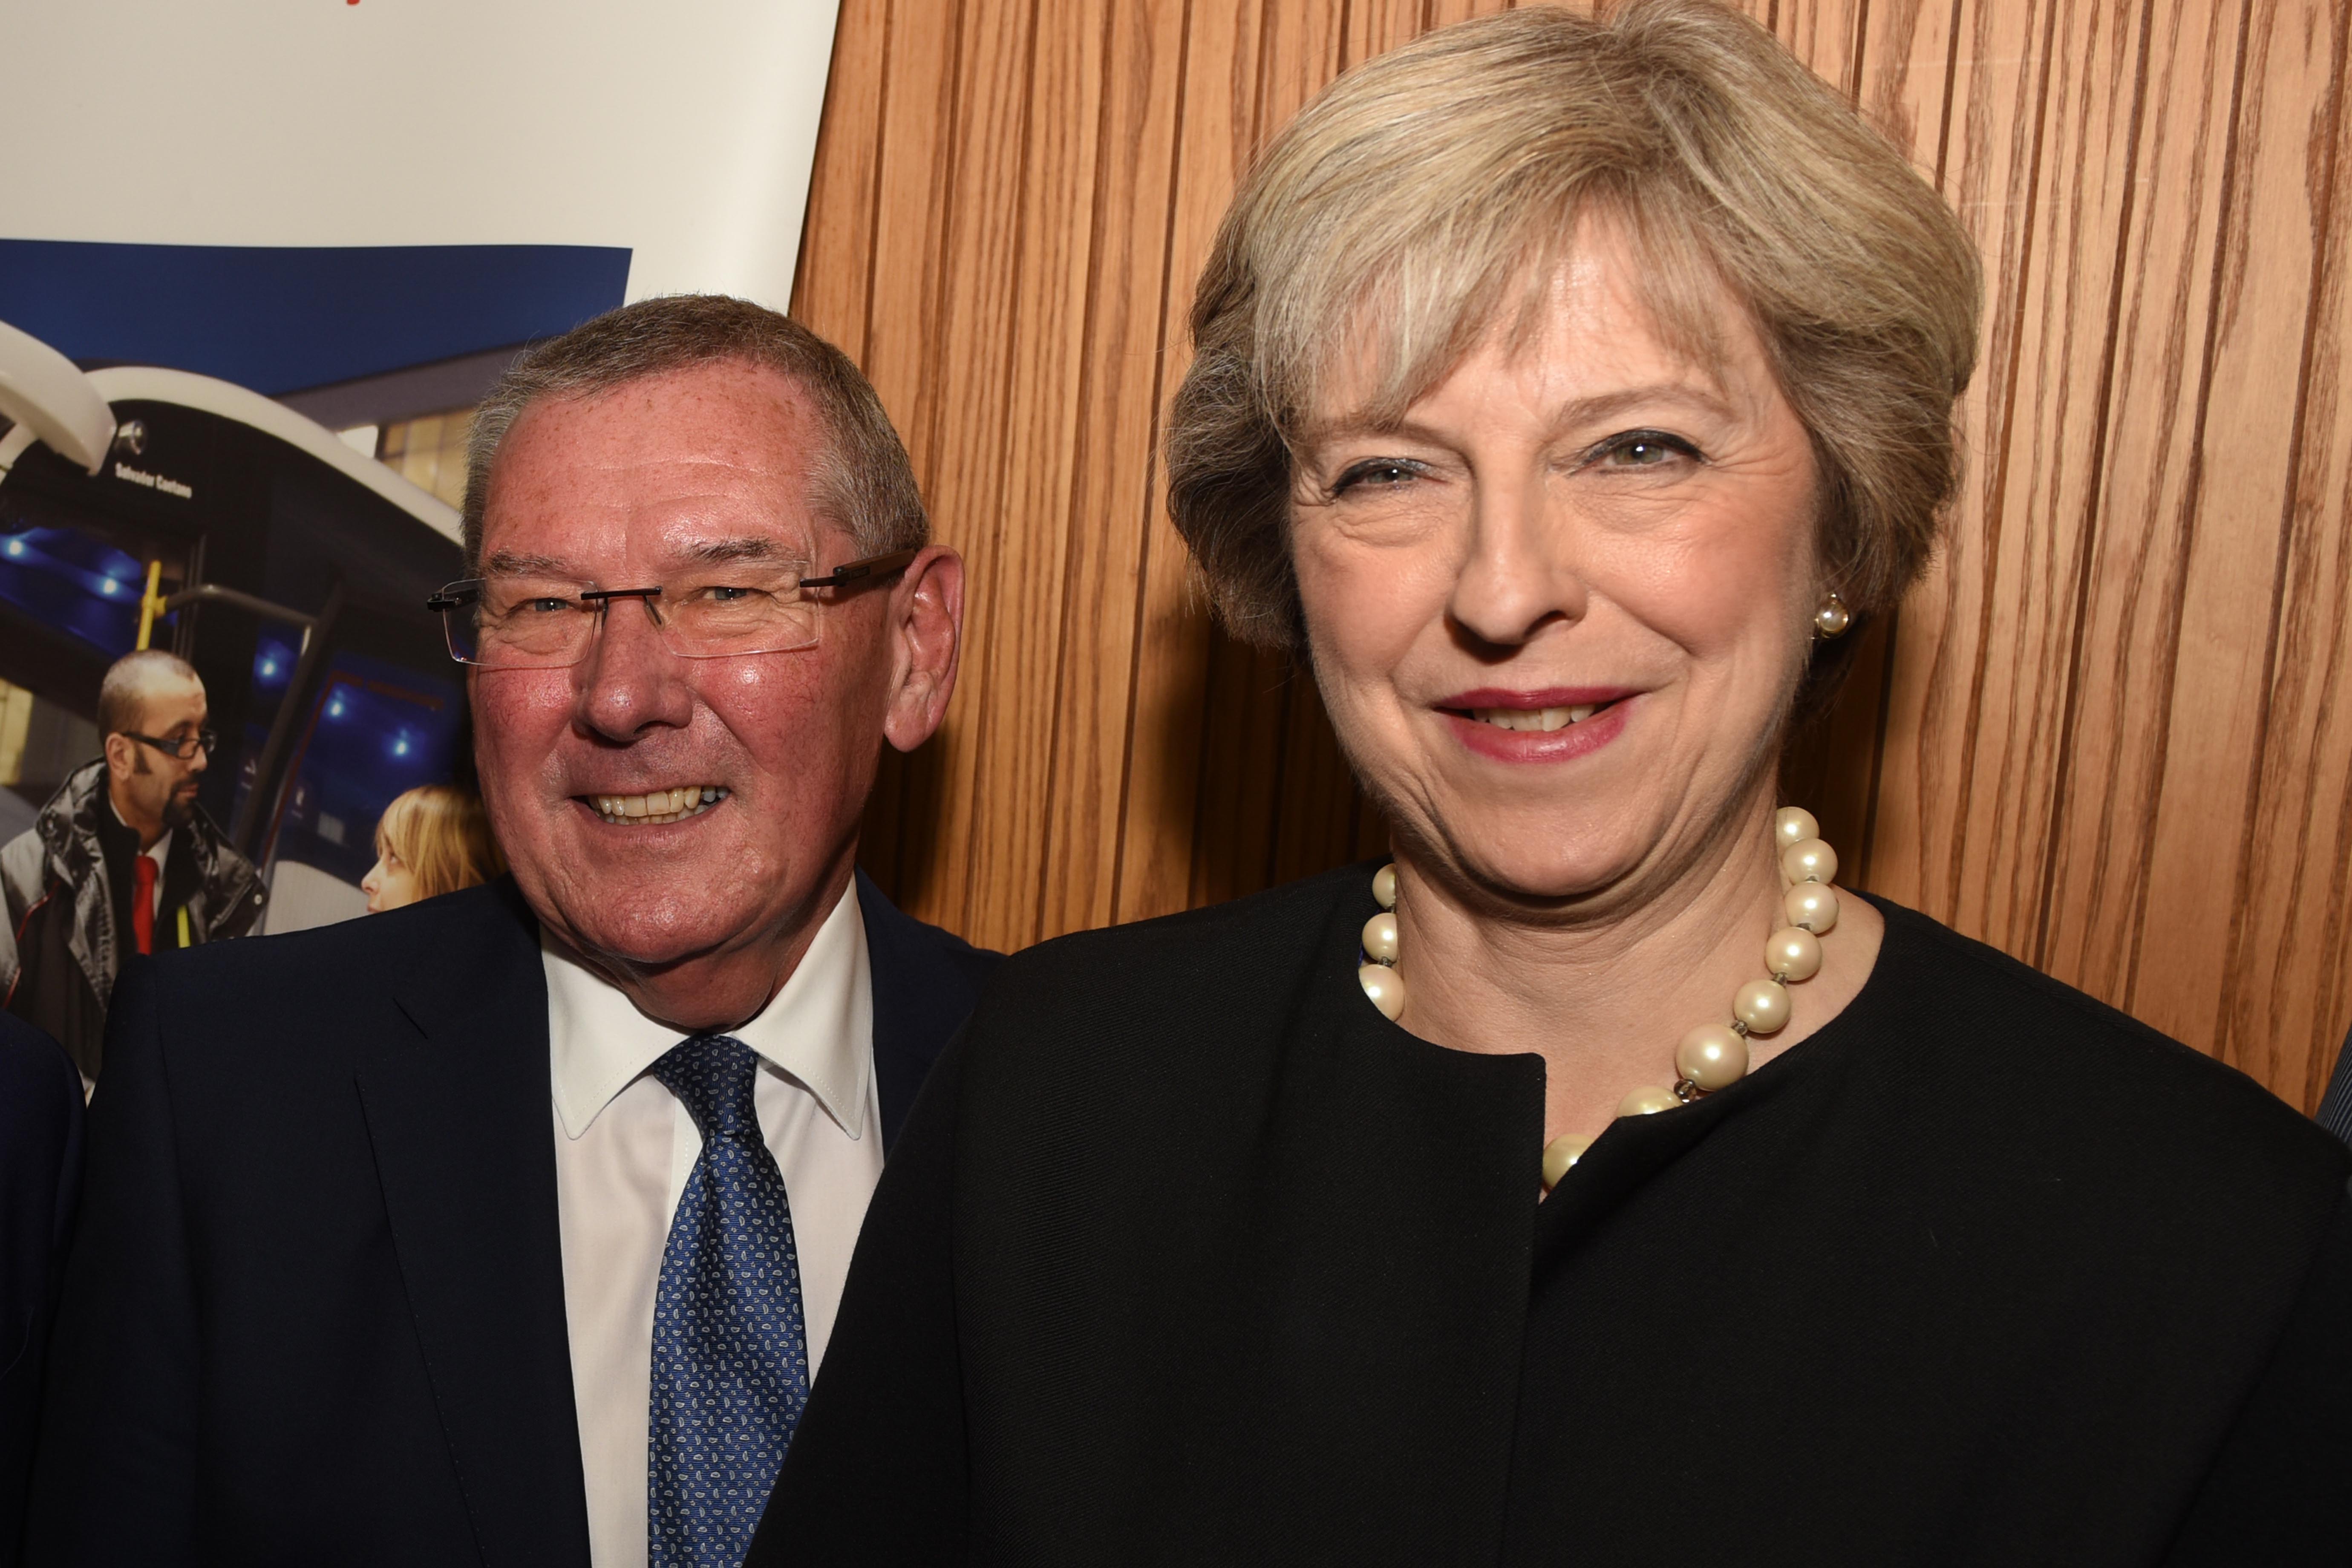 WMCA chair Cllr Bob Sleigh with Prime Minister Theresa May at the Conservative Party Conference in Birmingham